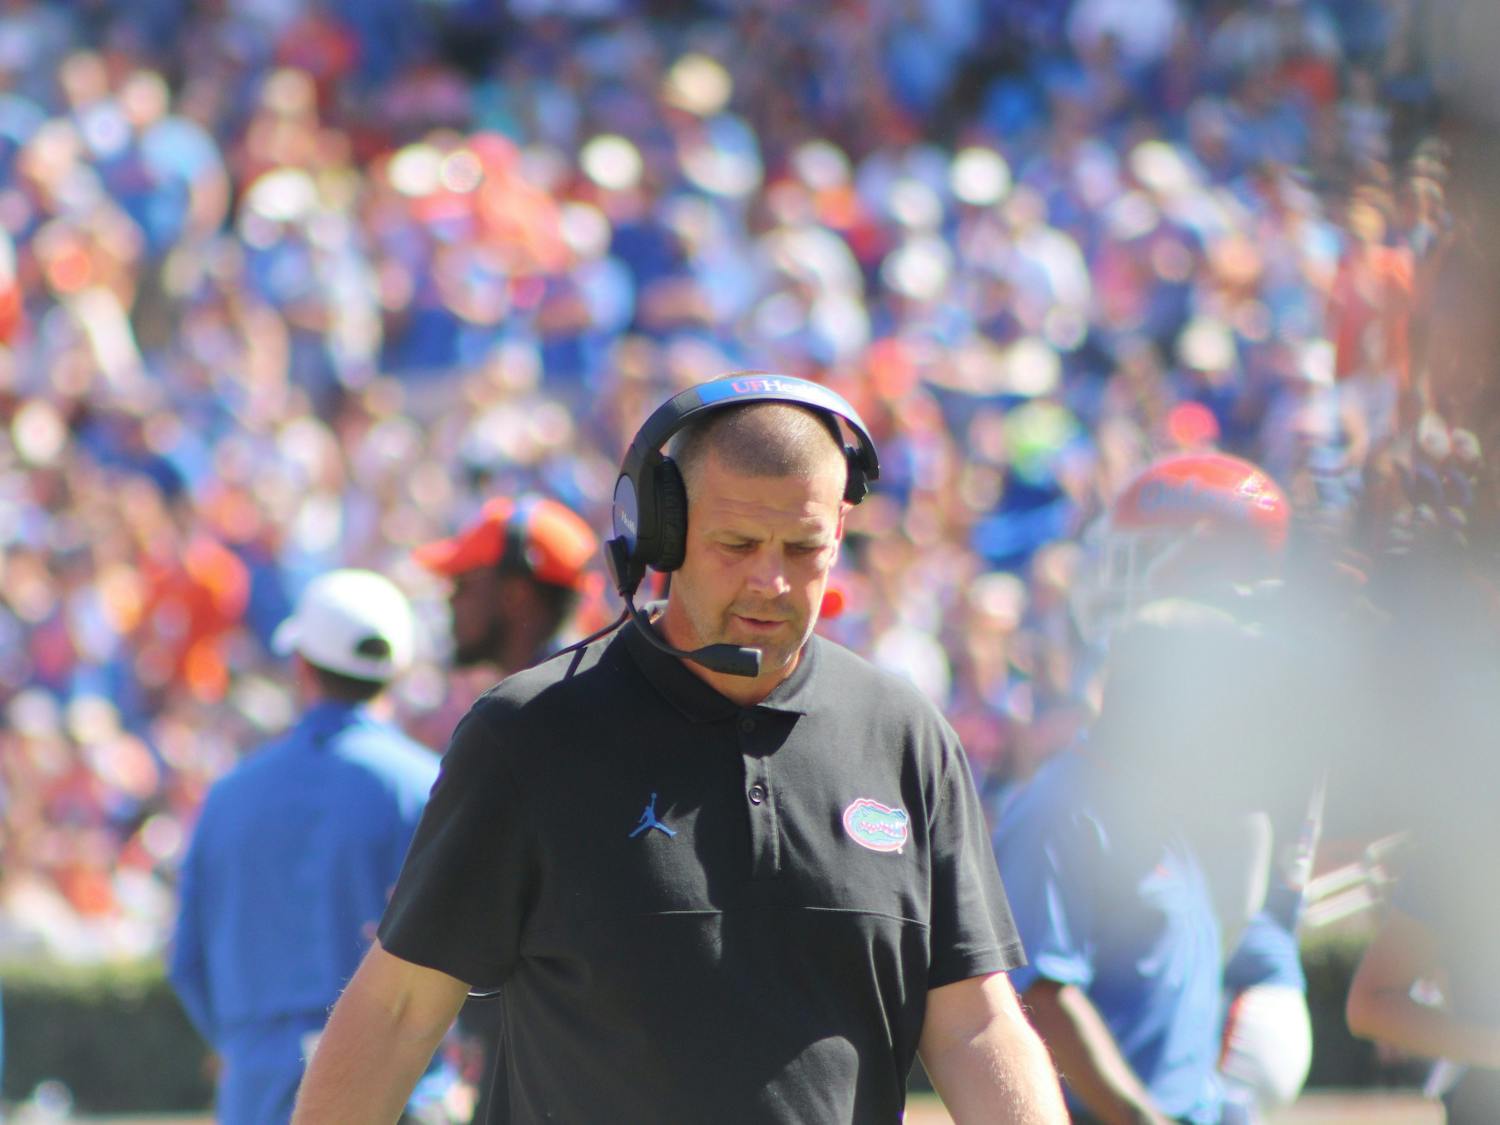 Florida head coach Billy Napier patrols the sidelines during his team's win over Missouri Saturday, Oct. 8, 2022. Napier will come face to face with his ties to the state of Louisiana when the LSU Tigers visit Gainesville this week.